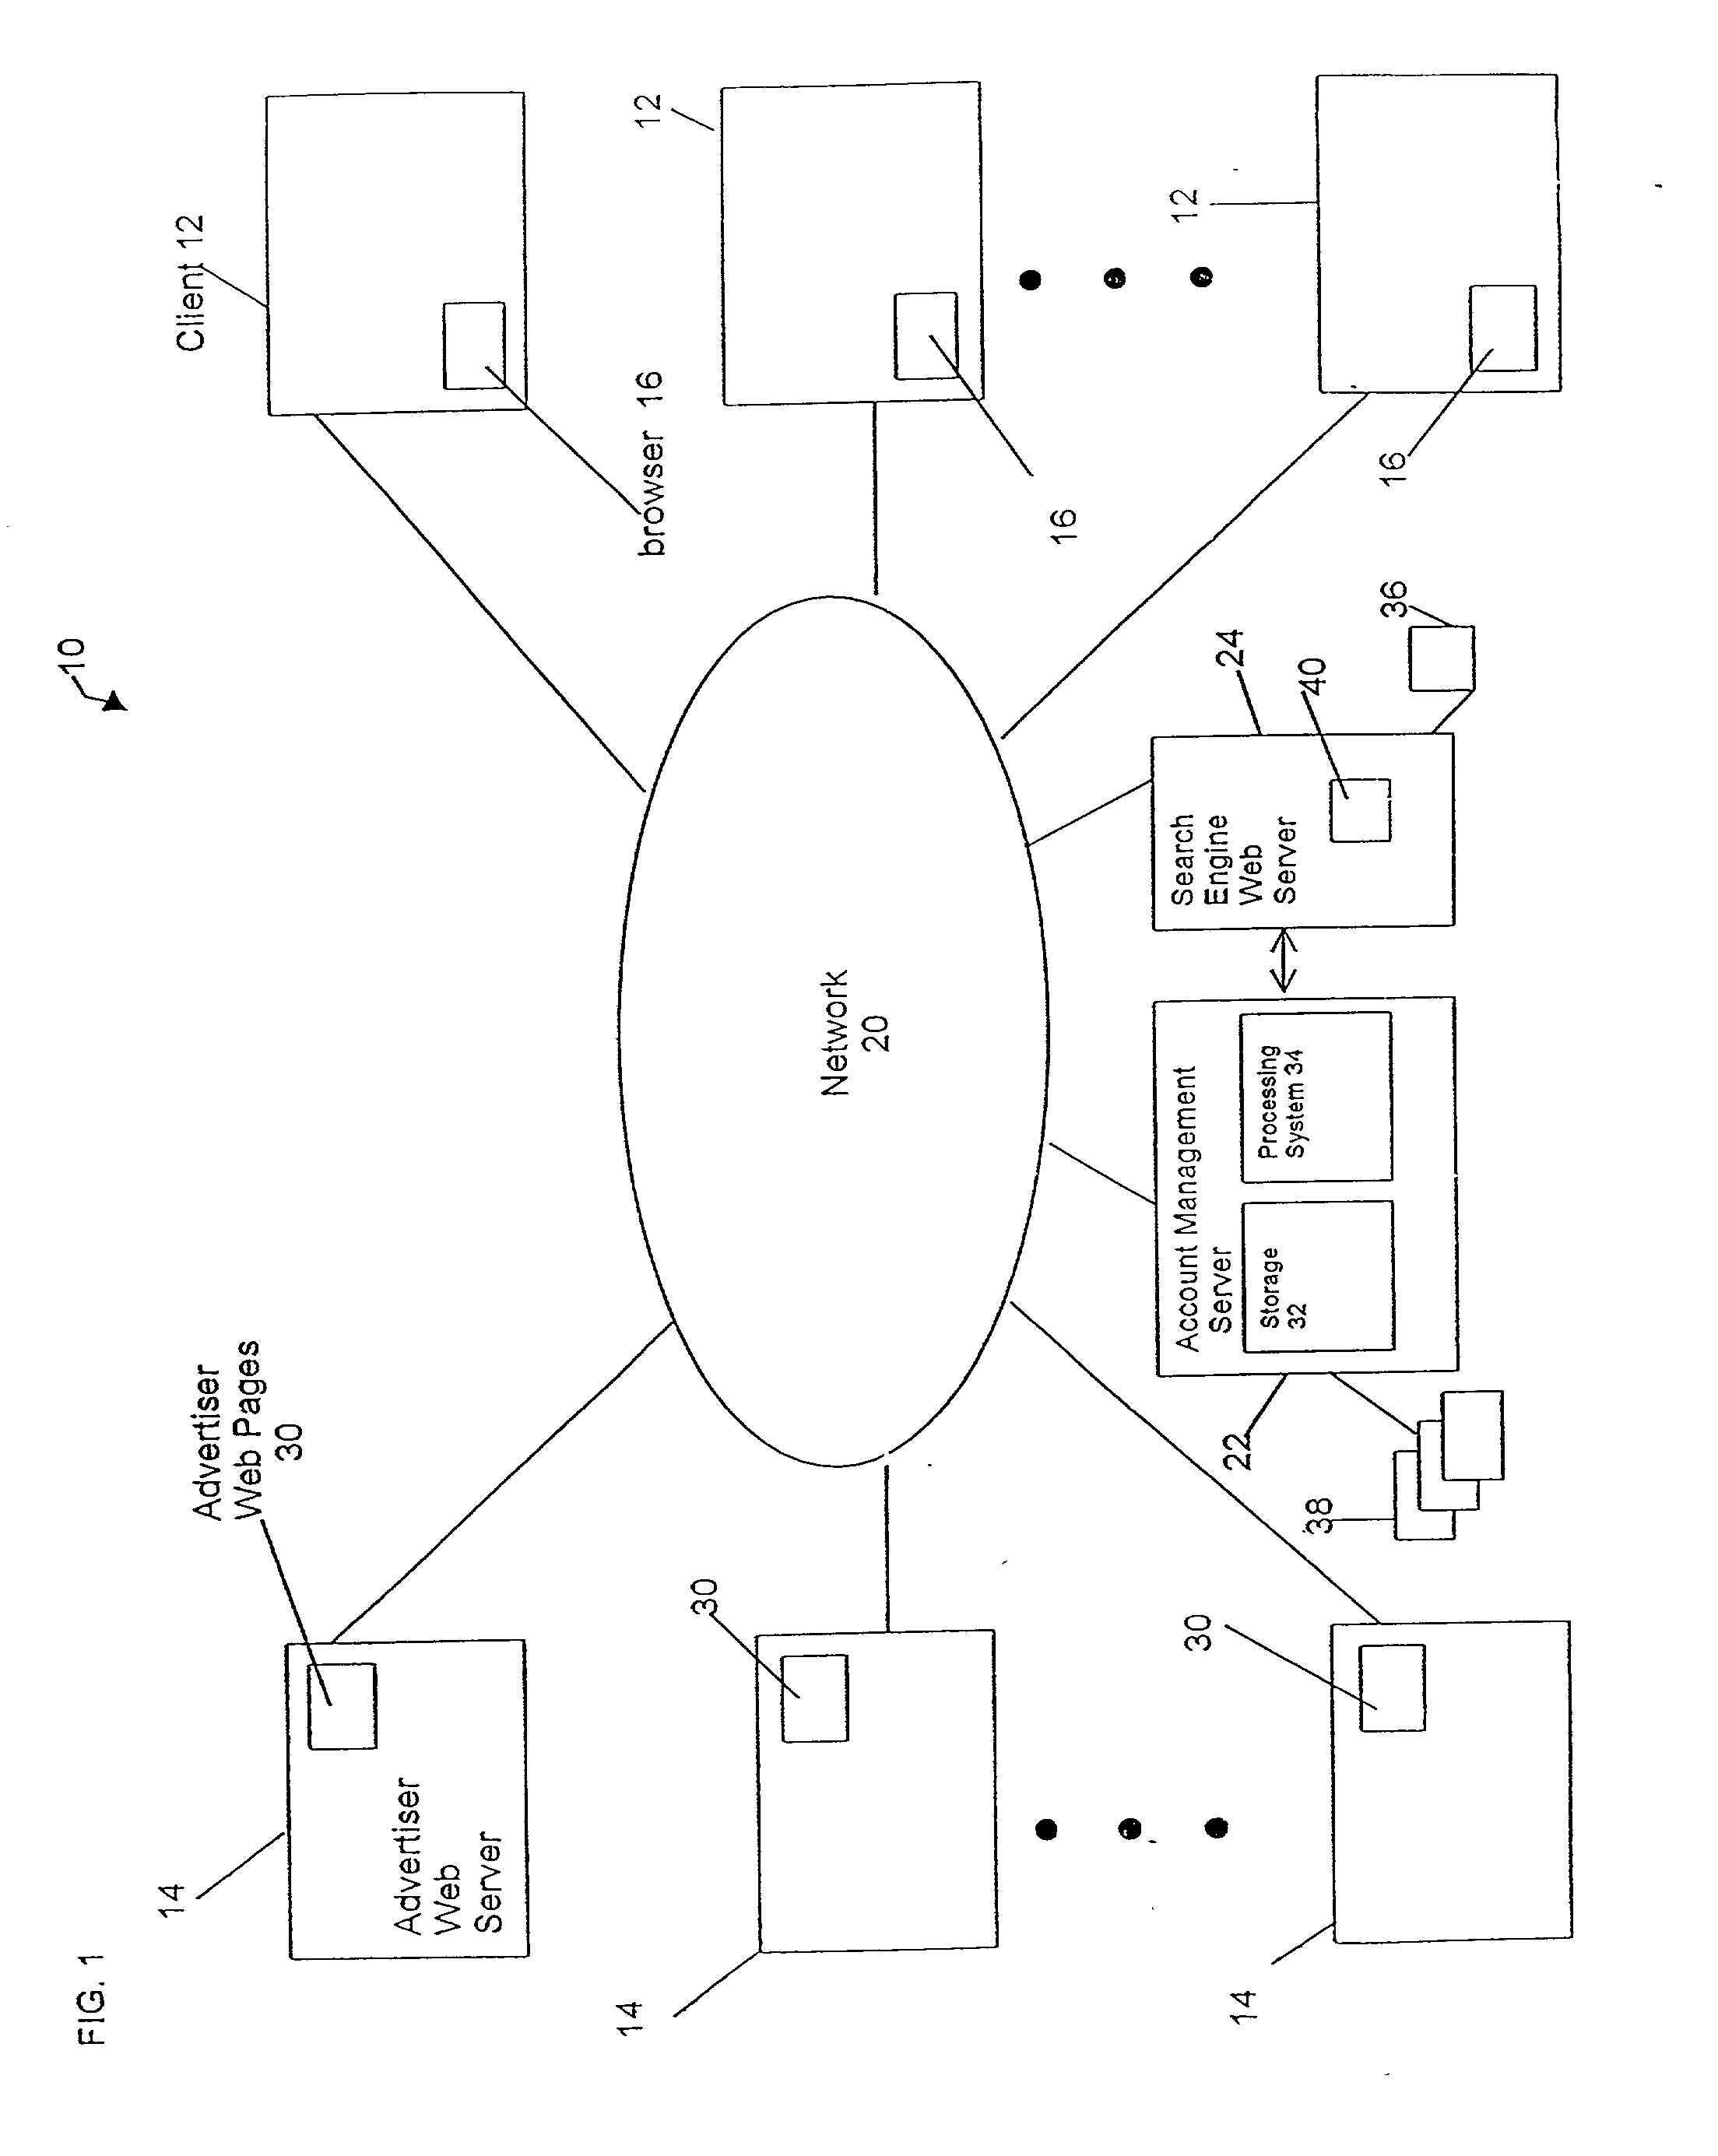 System and method for influencing a position on a search result list generated by a computer network search engine